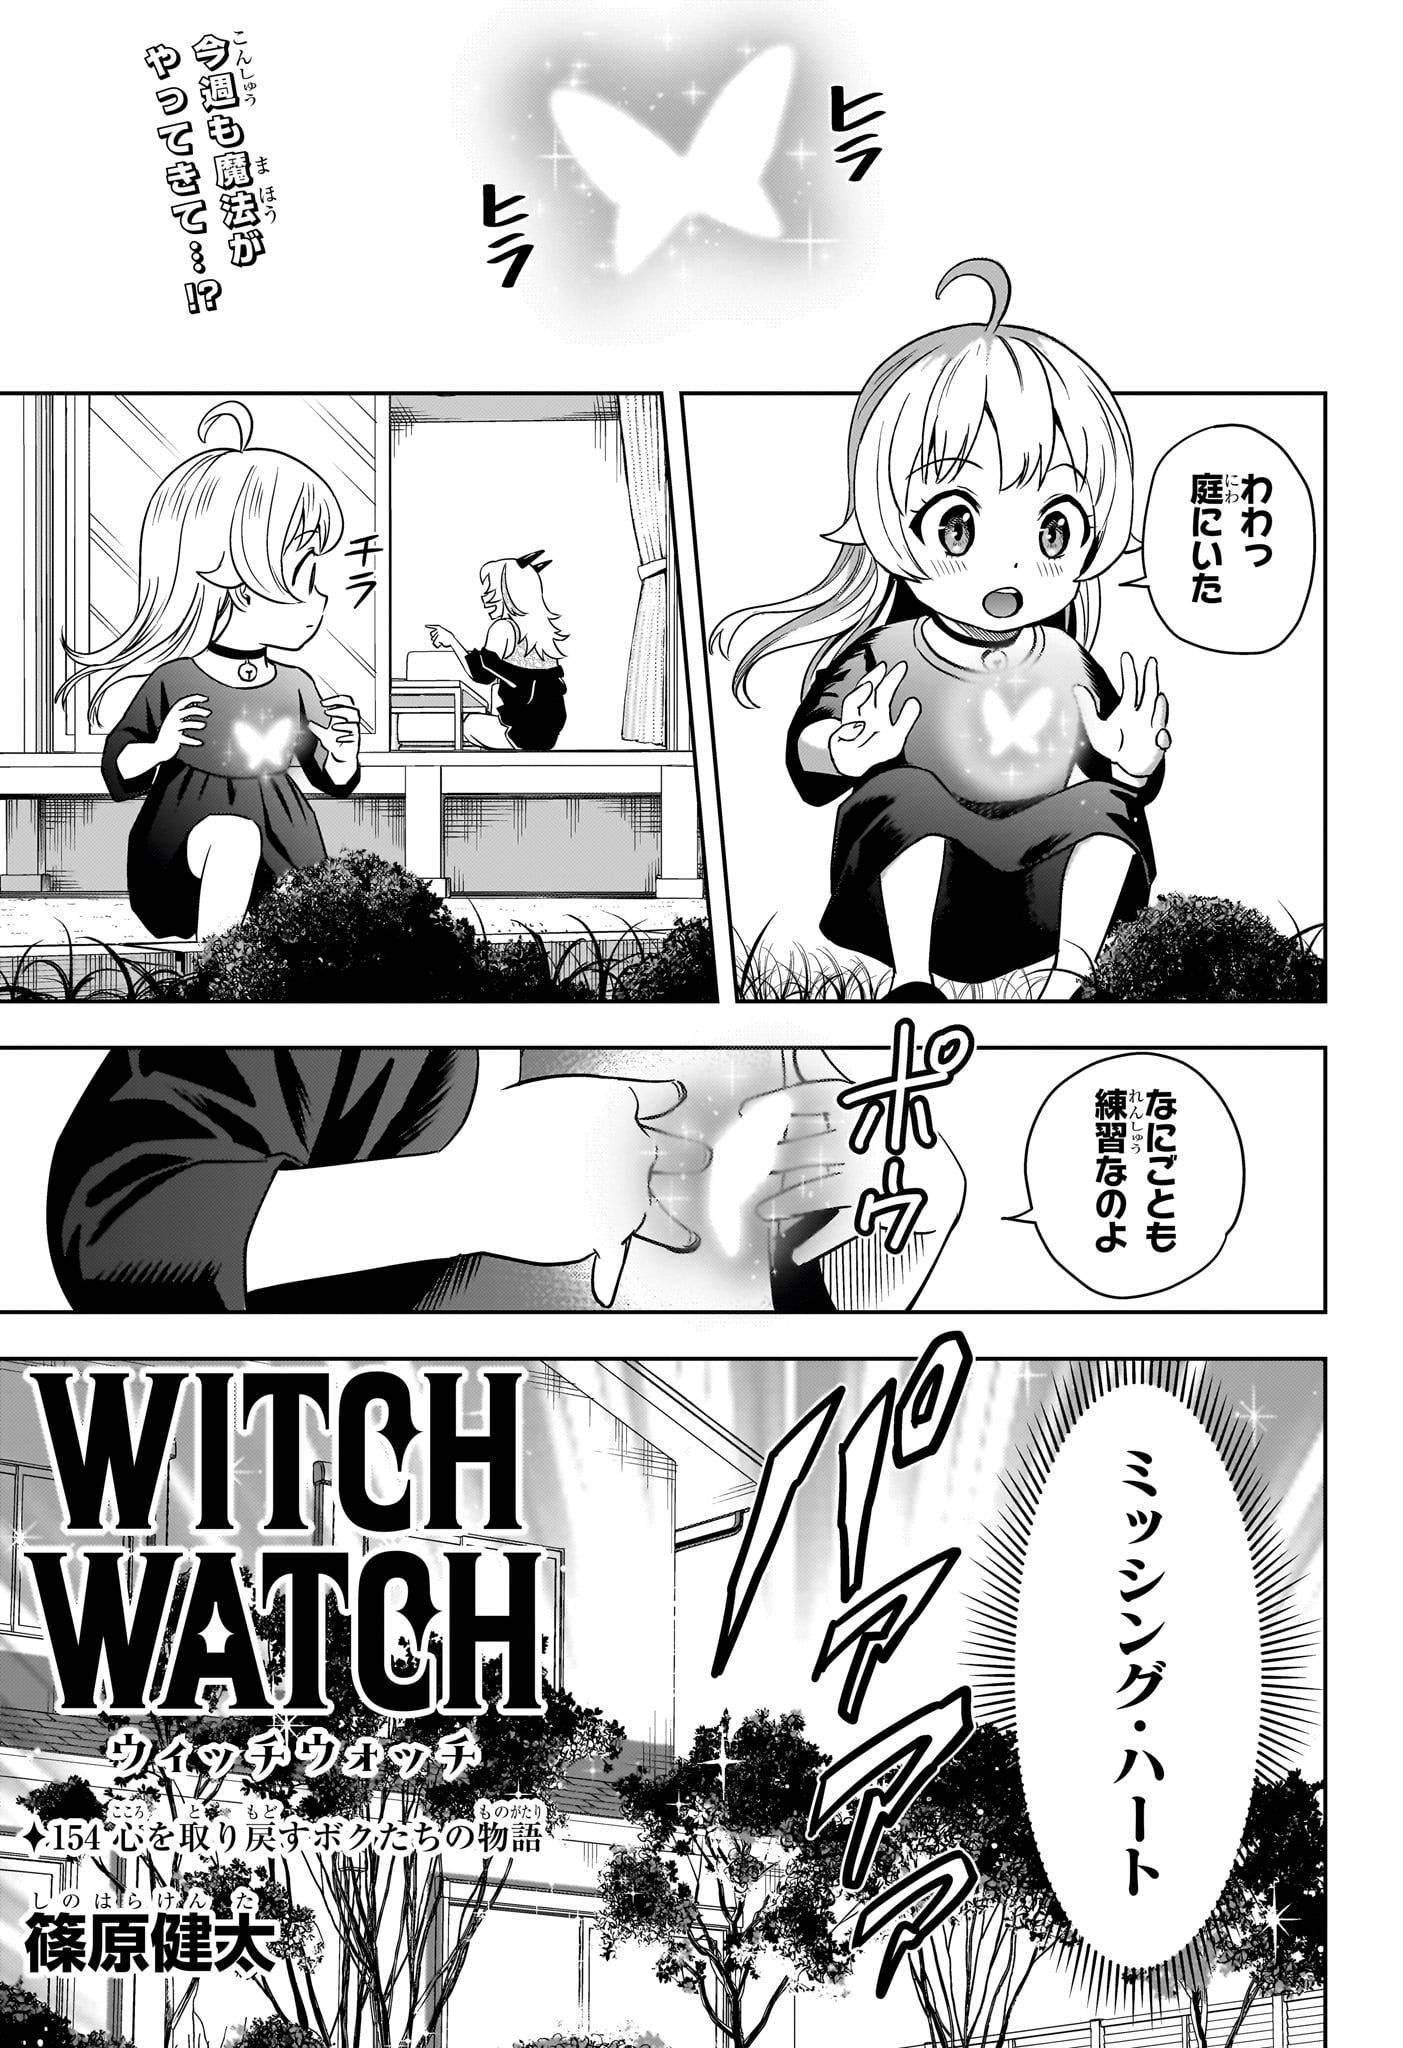 Witch Watch - Chapter 154 - Page 1